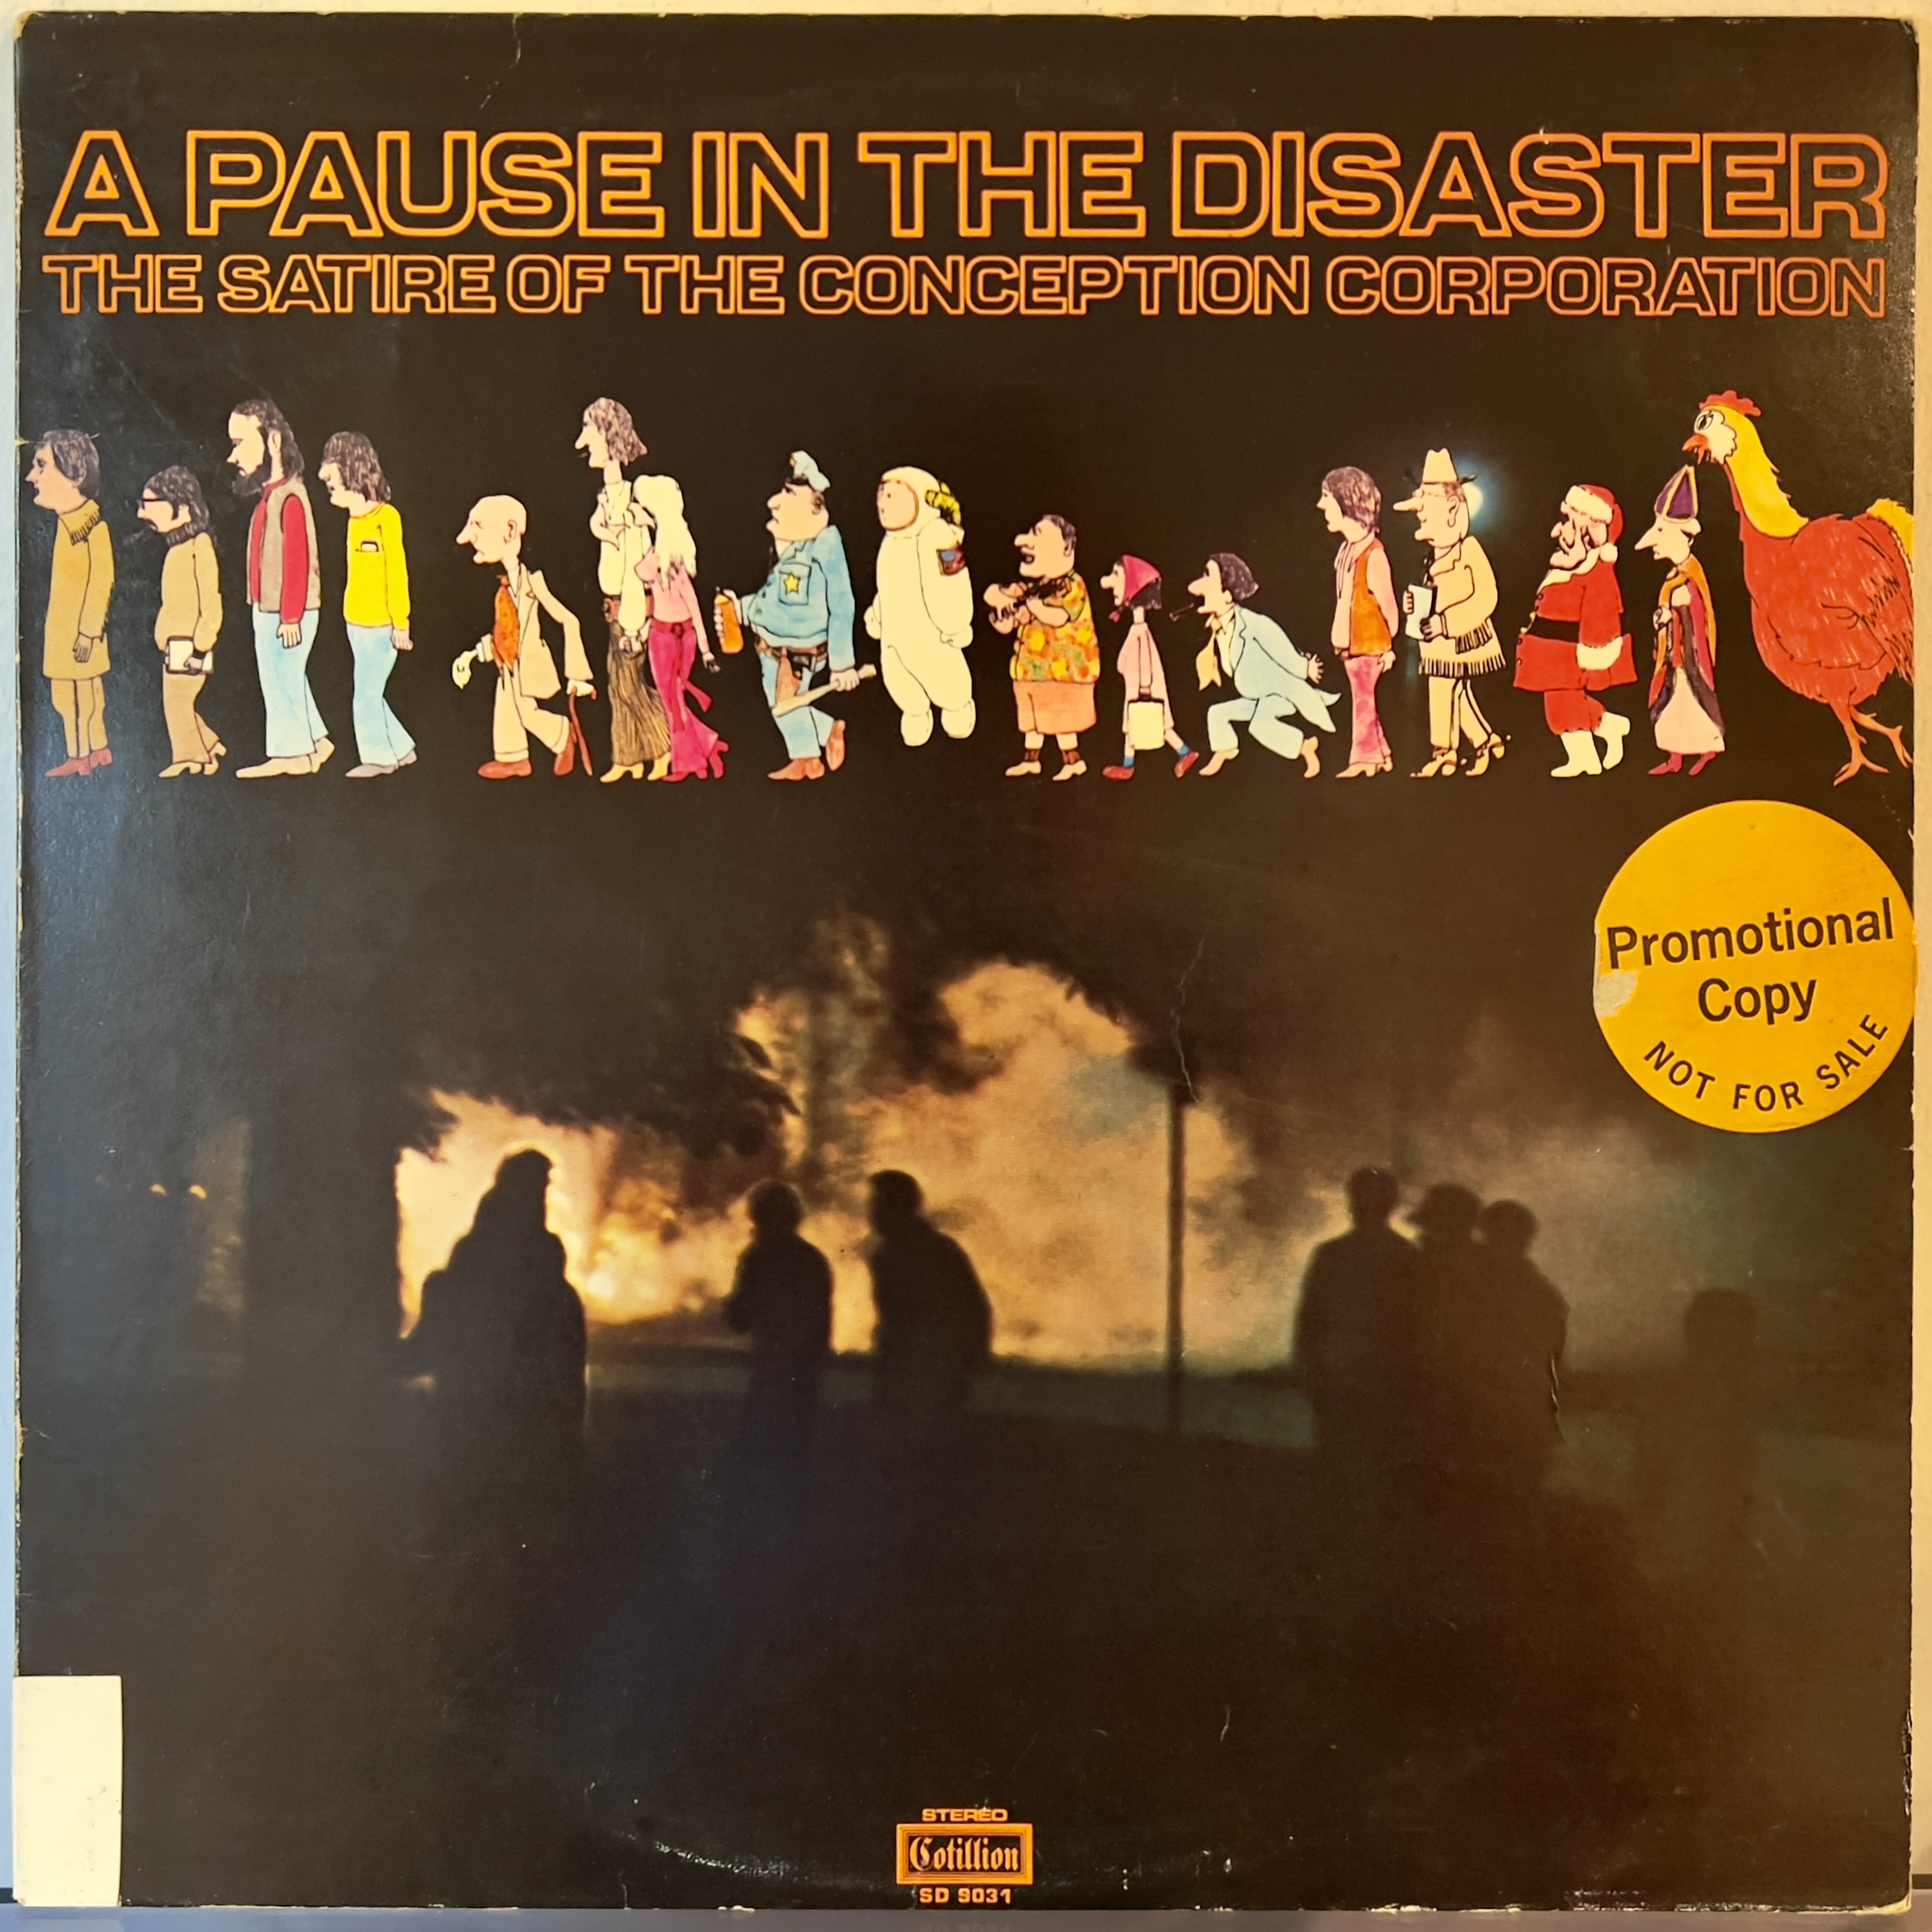 A Pause in the Disaster by The Conception Corporation